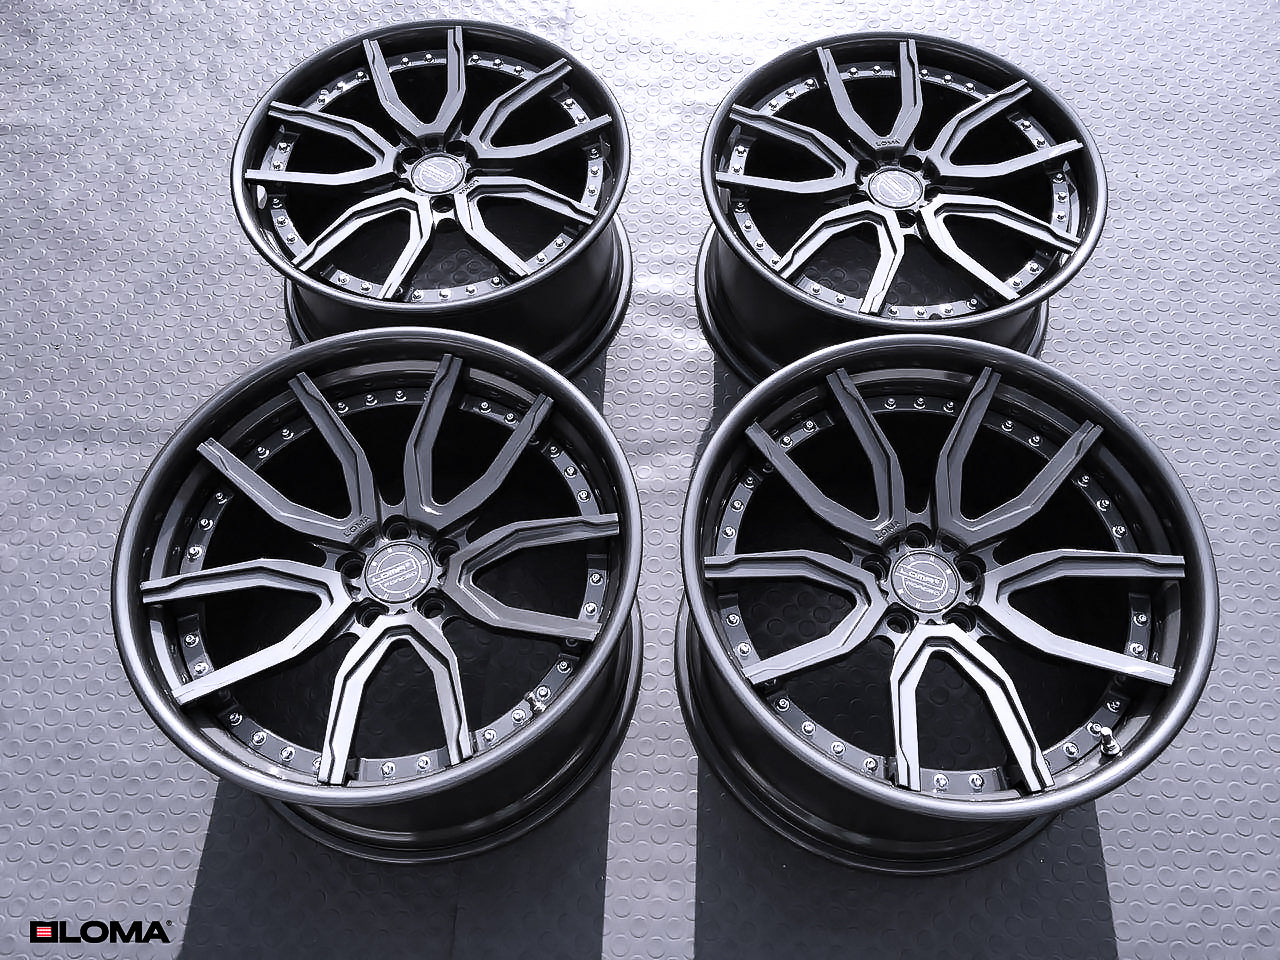 LF-5.1 Forged Wheels by LOMA: 19″-24″ Sizes in 1/2/3-Piece Options.